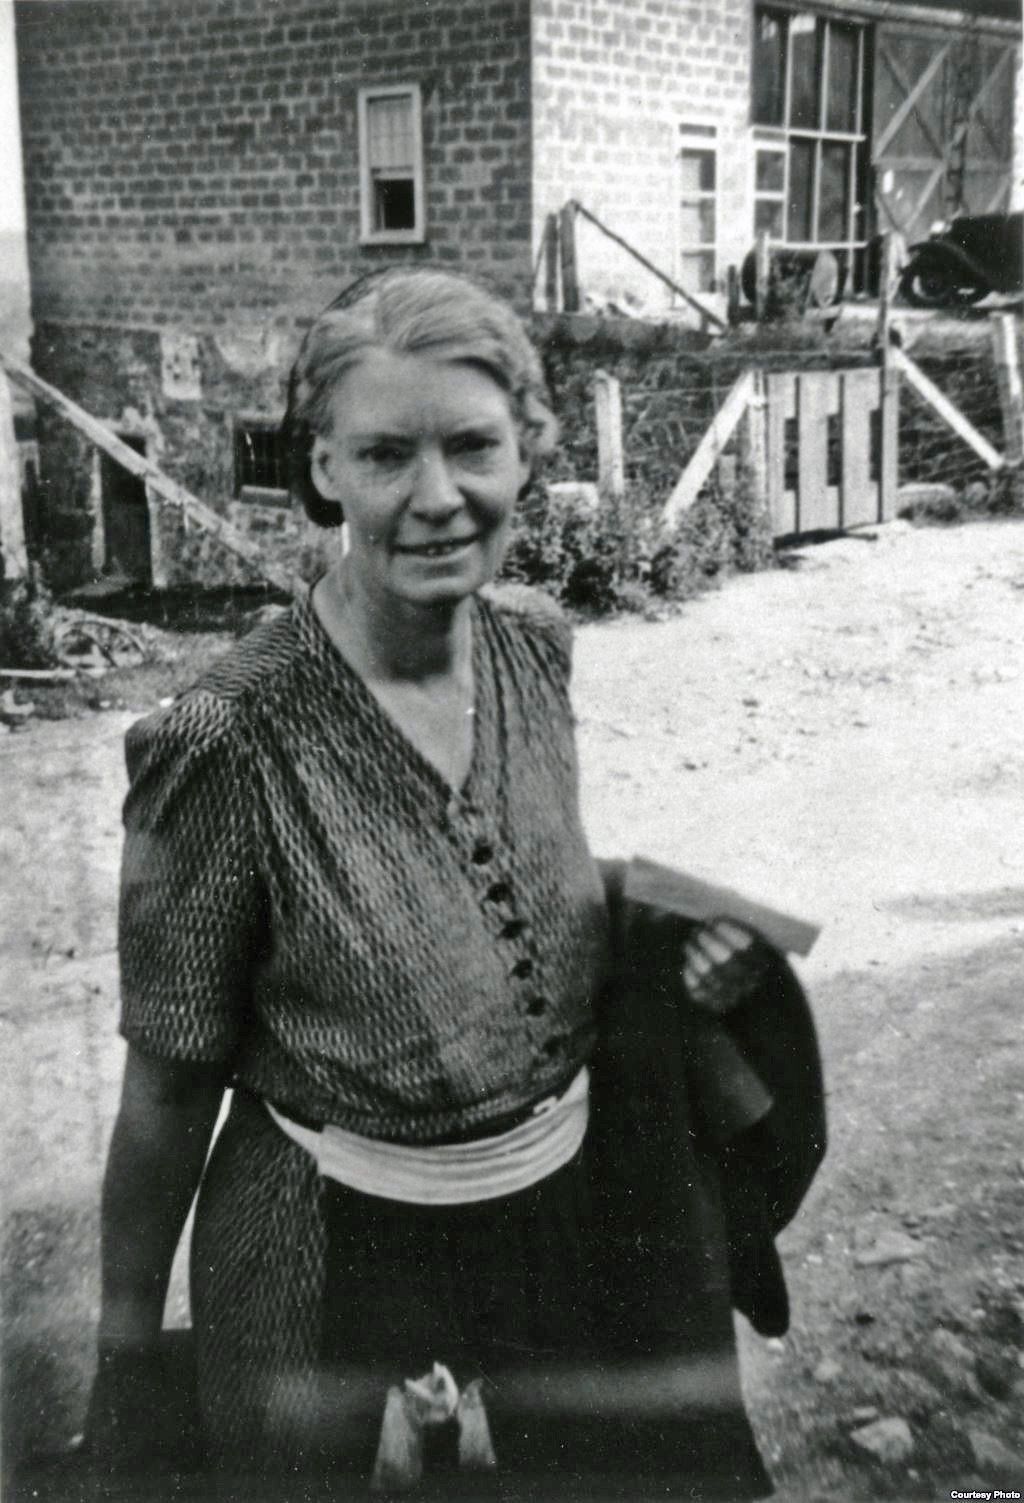 Revisiting Dorothy Day